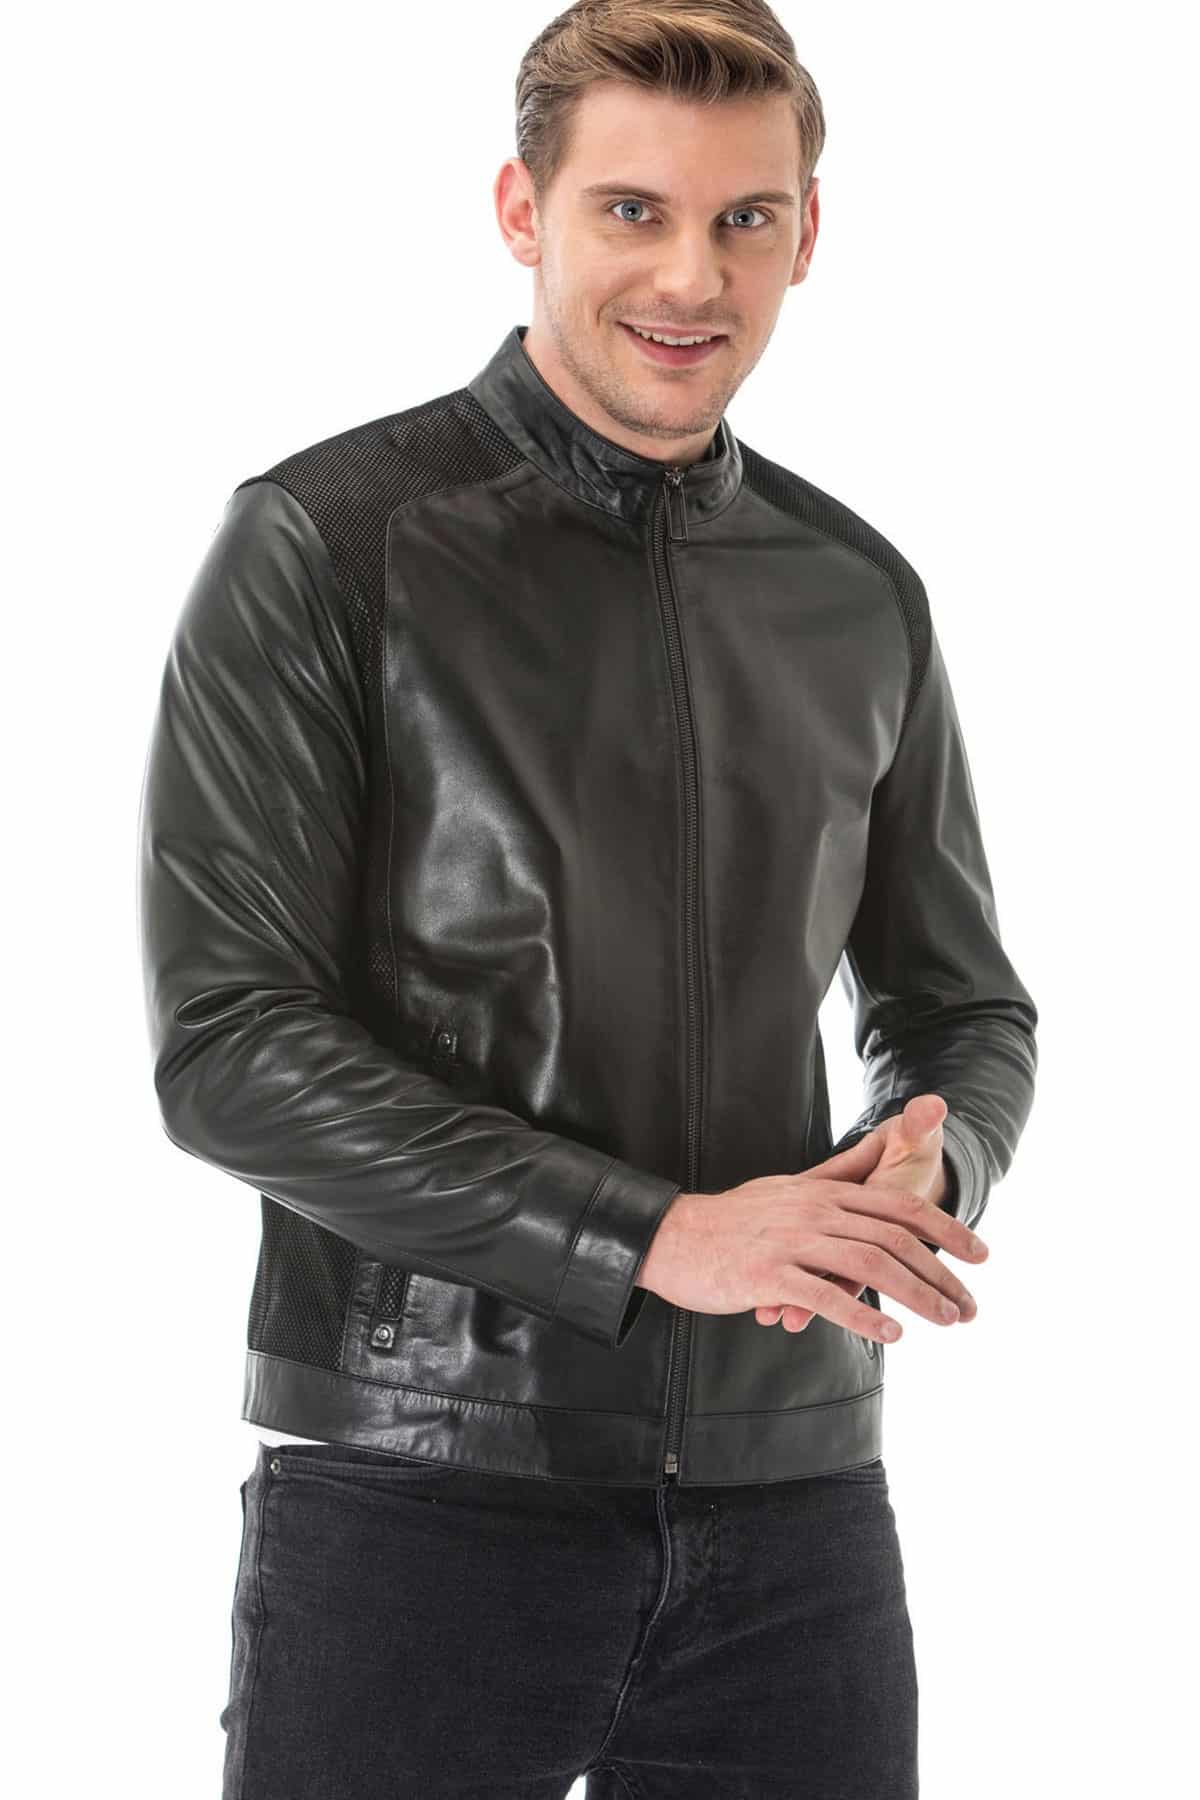 Looking for Classic Black Slim Fit Leather Bomber Jacket Mens?